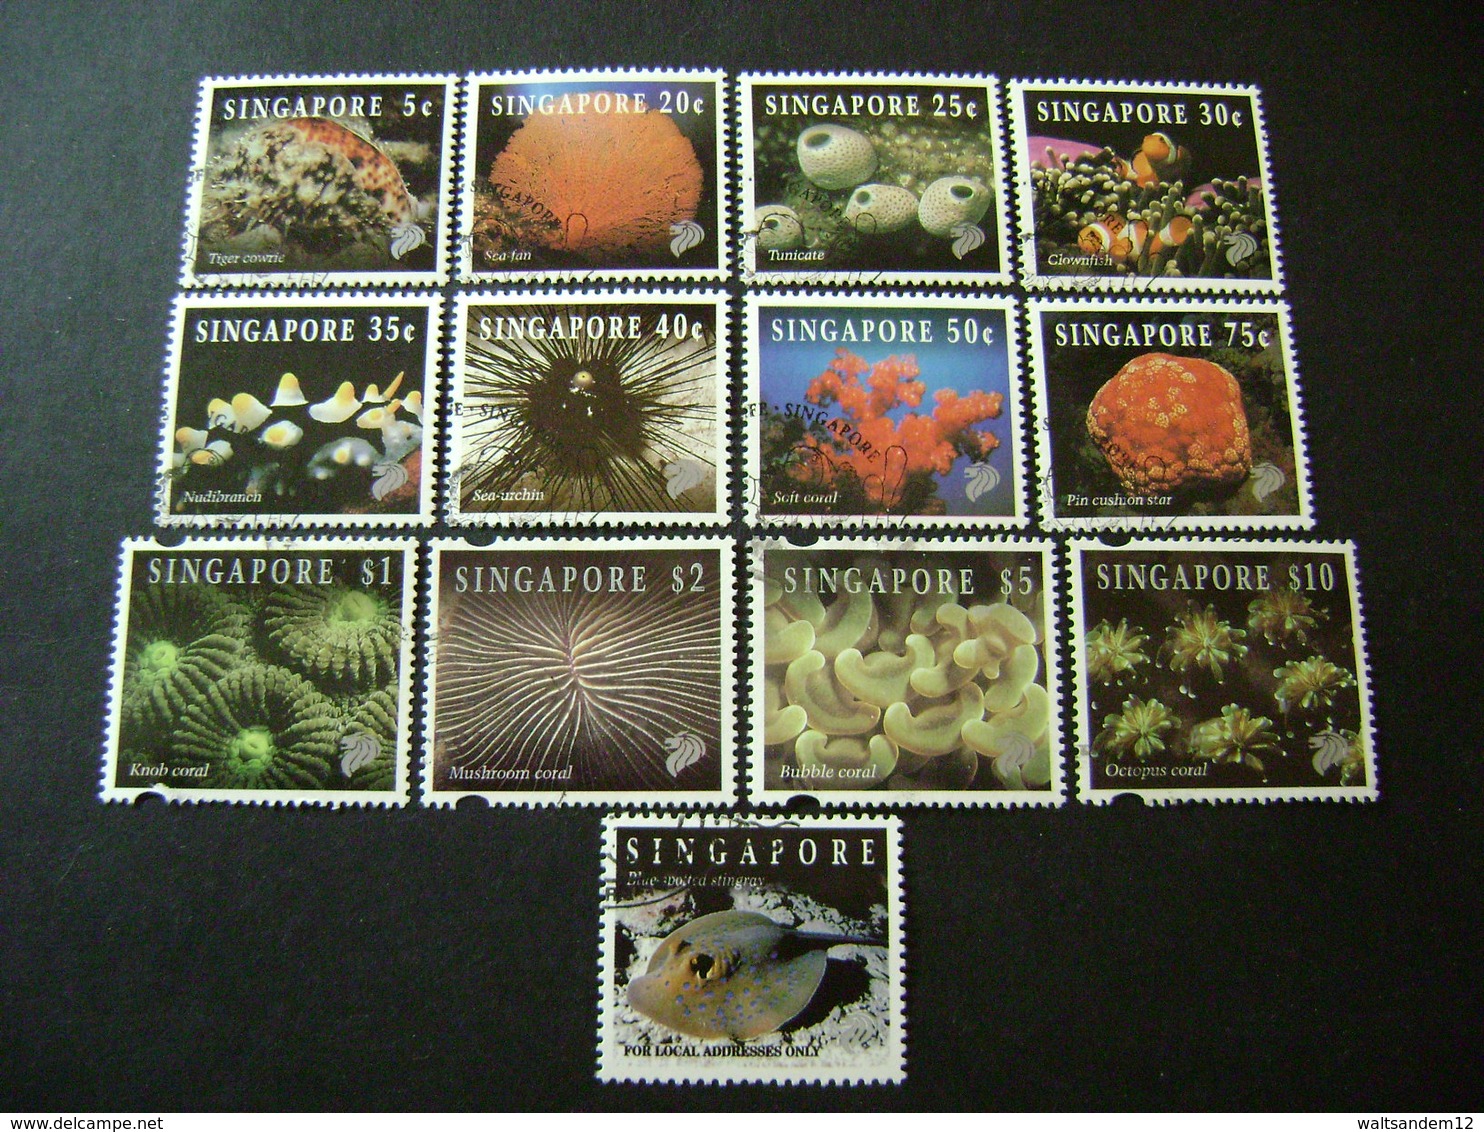 Singapore 1994 Coral And Reef Life Definitive Set (SG 742-753, 784) - Used [Sale Price] - Singapore (1959-...)